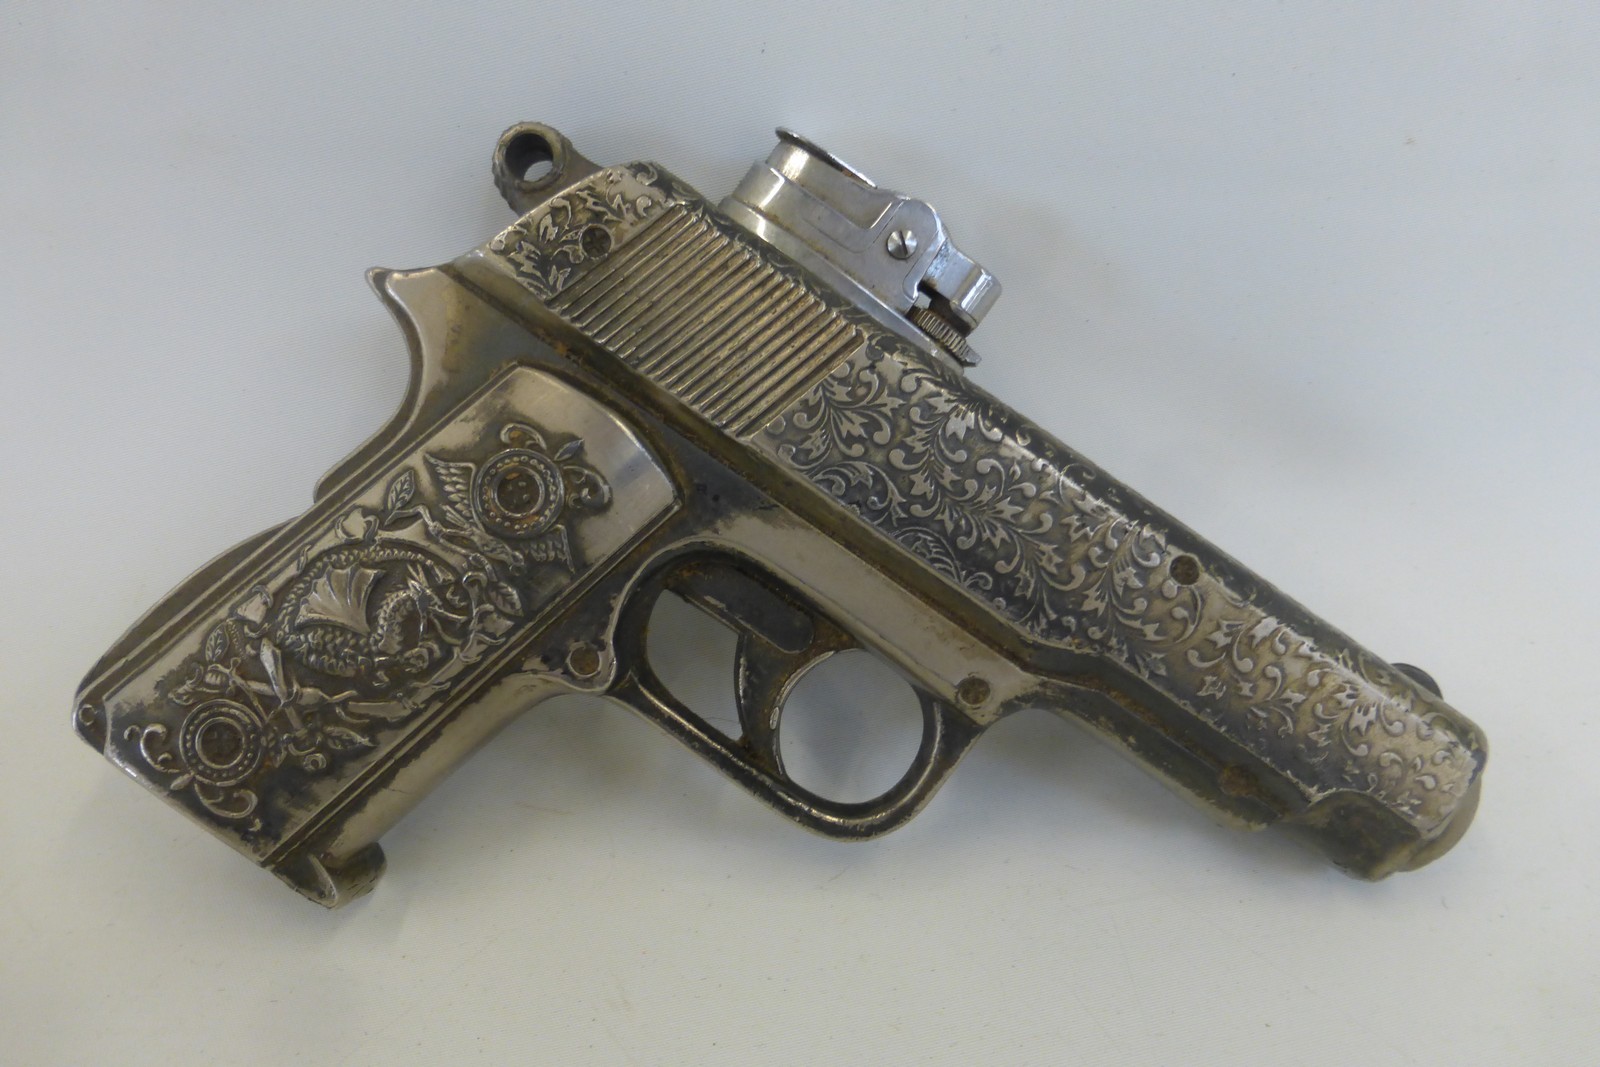 A novelty cigarette lighter in the form of an automatic pistol, approximately 6" long.